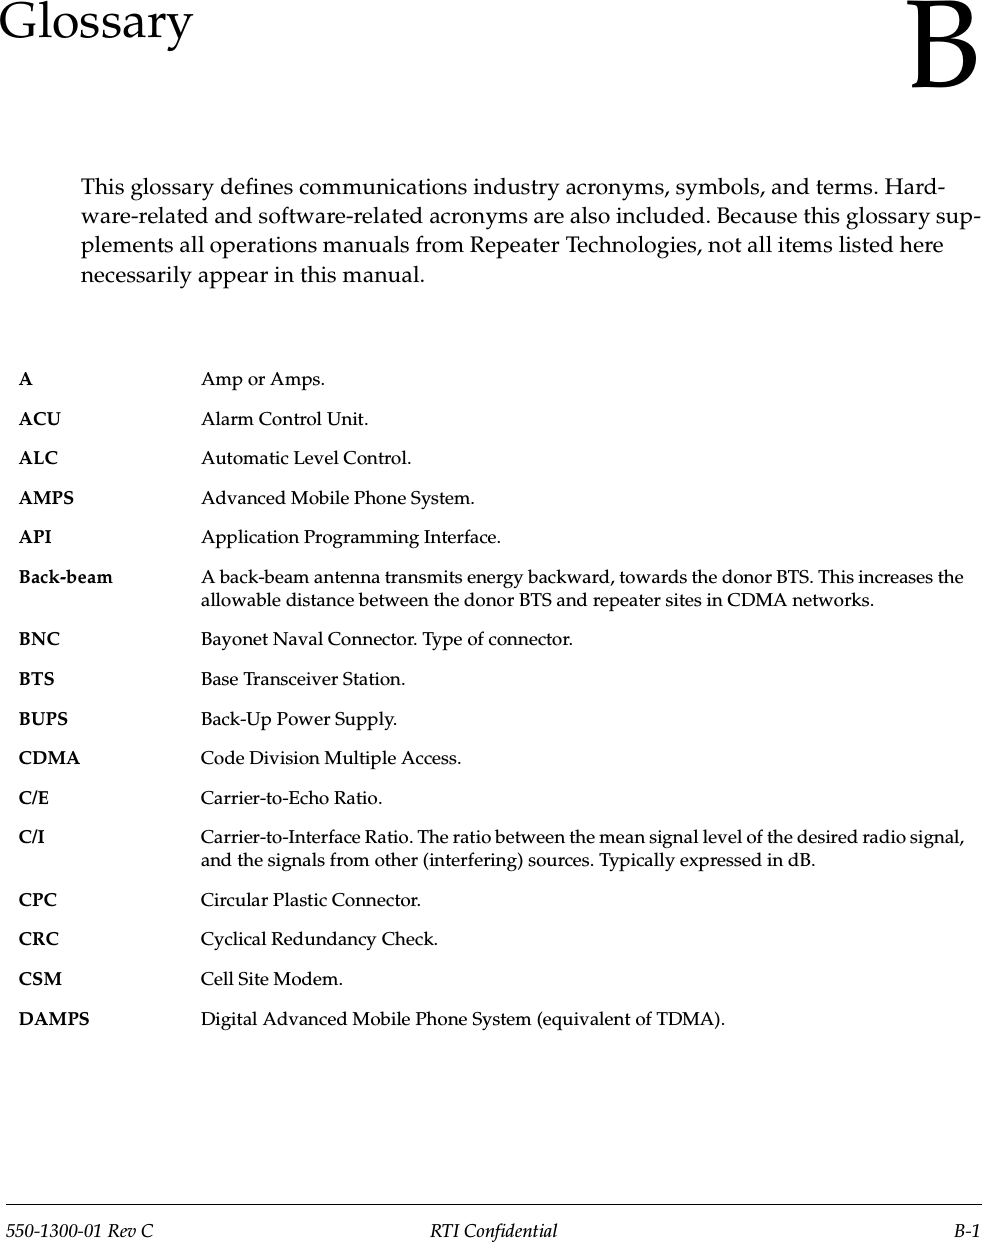 550-1300-01 Rev C RTI Confidential B-1BGlossaryThis glossary defines communications industry acronyms, symbols, and terms. Hard-ware-related and software-related acronyms are also included. Because this glossary sup-plements all operations manuals from Repeater Technologies, not all items listed here necessarily appear in this manual.AAmp or Amps.ACU Alarm Control Unit.ALC Automatic Level Control.AMPS Advanced Mobile Phone System.API Application Programming Interface.Back-beam A back-beam antenna transmits energy backward, towards the donor BTS. This increases the allowable distance between the donor BTS and repeater sites in CDMA networks.BNC Bayonet Naval Connector. Type of connector.BTS Base Transceiver Station.BUPS Back-Up Power Supply.CDMA Code Division Multiple Access.C/E Carrier-to-Echo Ratio.C/I Carrier-to-Interface Ratio. The ratio between the mean signal level of the desired radio signal, and the signals from other (interfering) sources. Typically expressed in dB.CPC Circular Plastic Connector.CRC Cyclical Redundancy Check.CSM Cell Site Modem.DAMPS Digital Advanced Mobile Phone System (equivalent of TDMA).